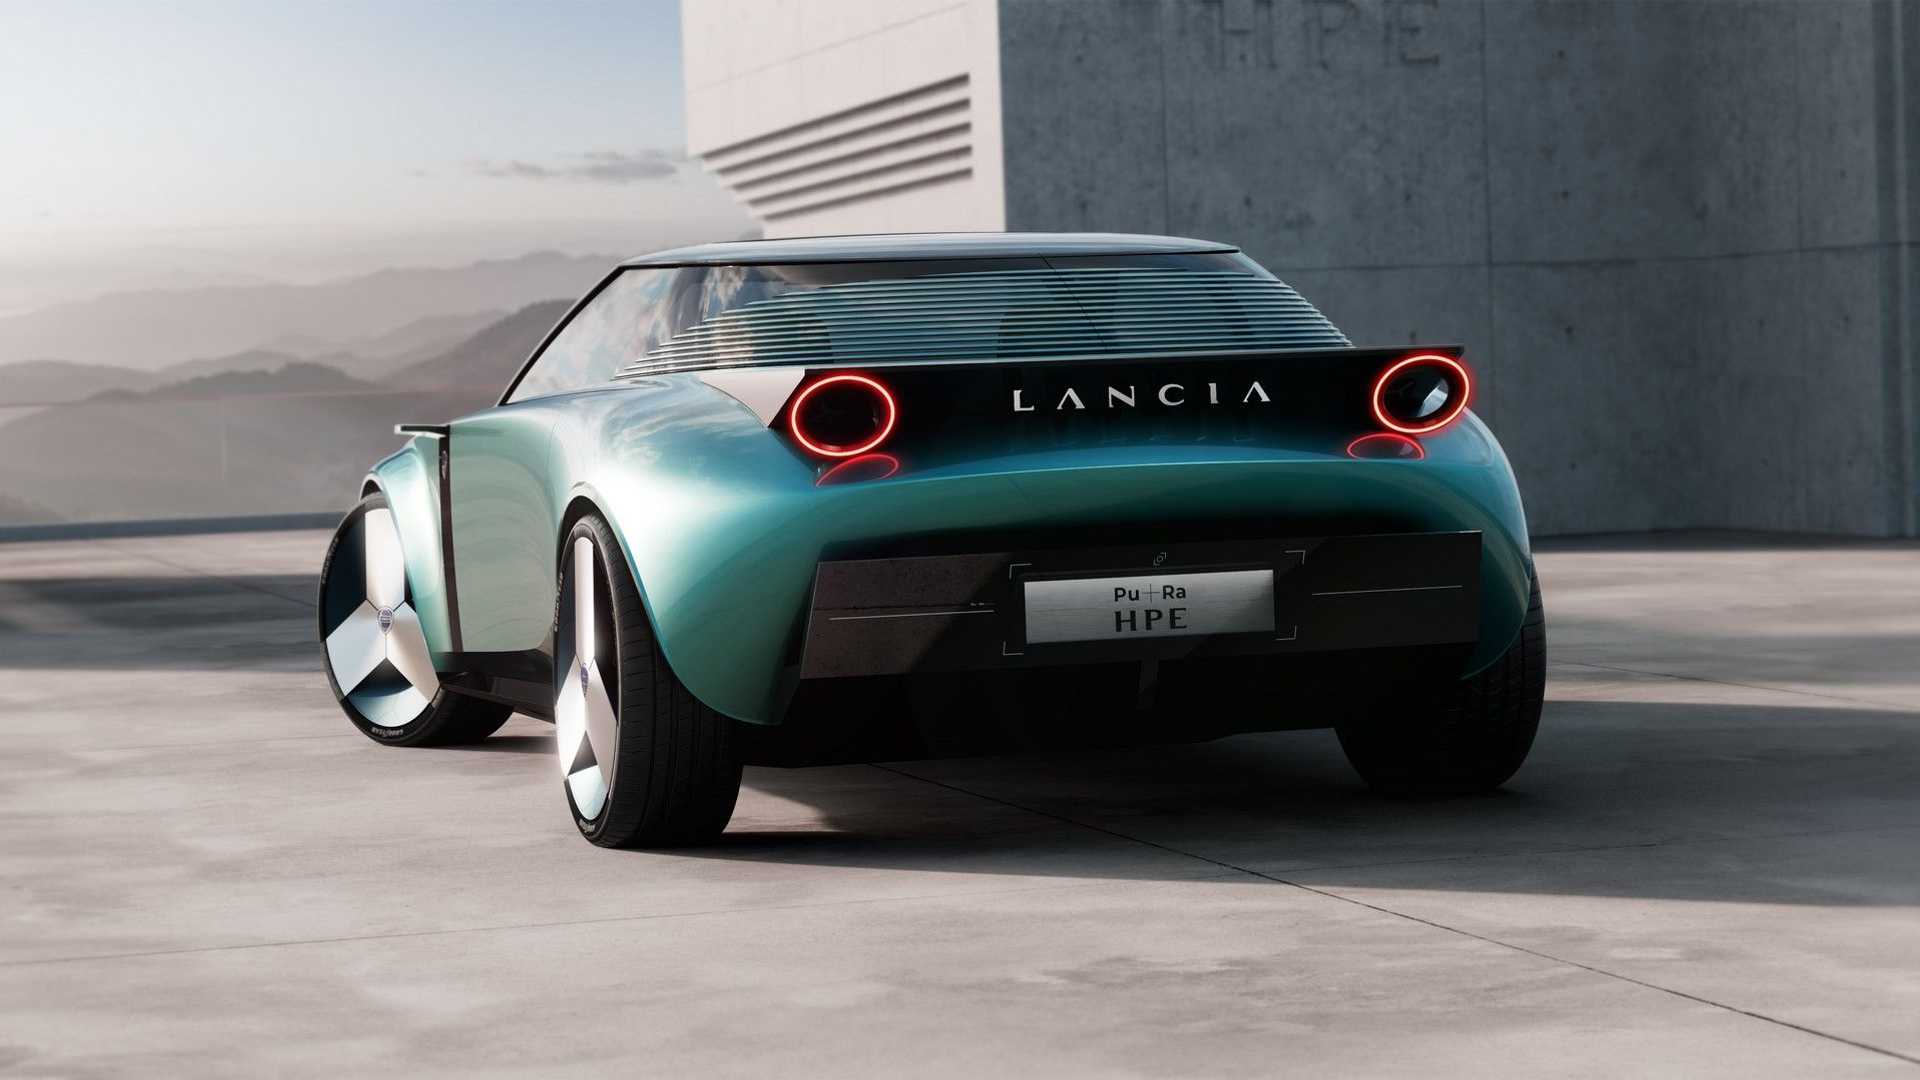 lancia pu+ra hpe concept debuts as all-electric coupe with stratos-inspired design